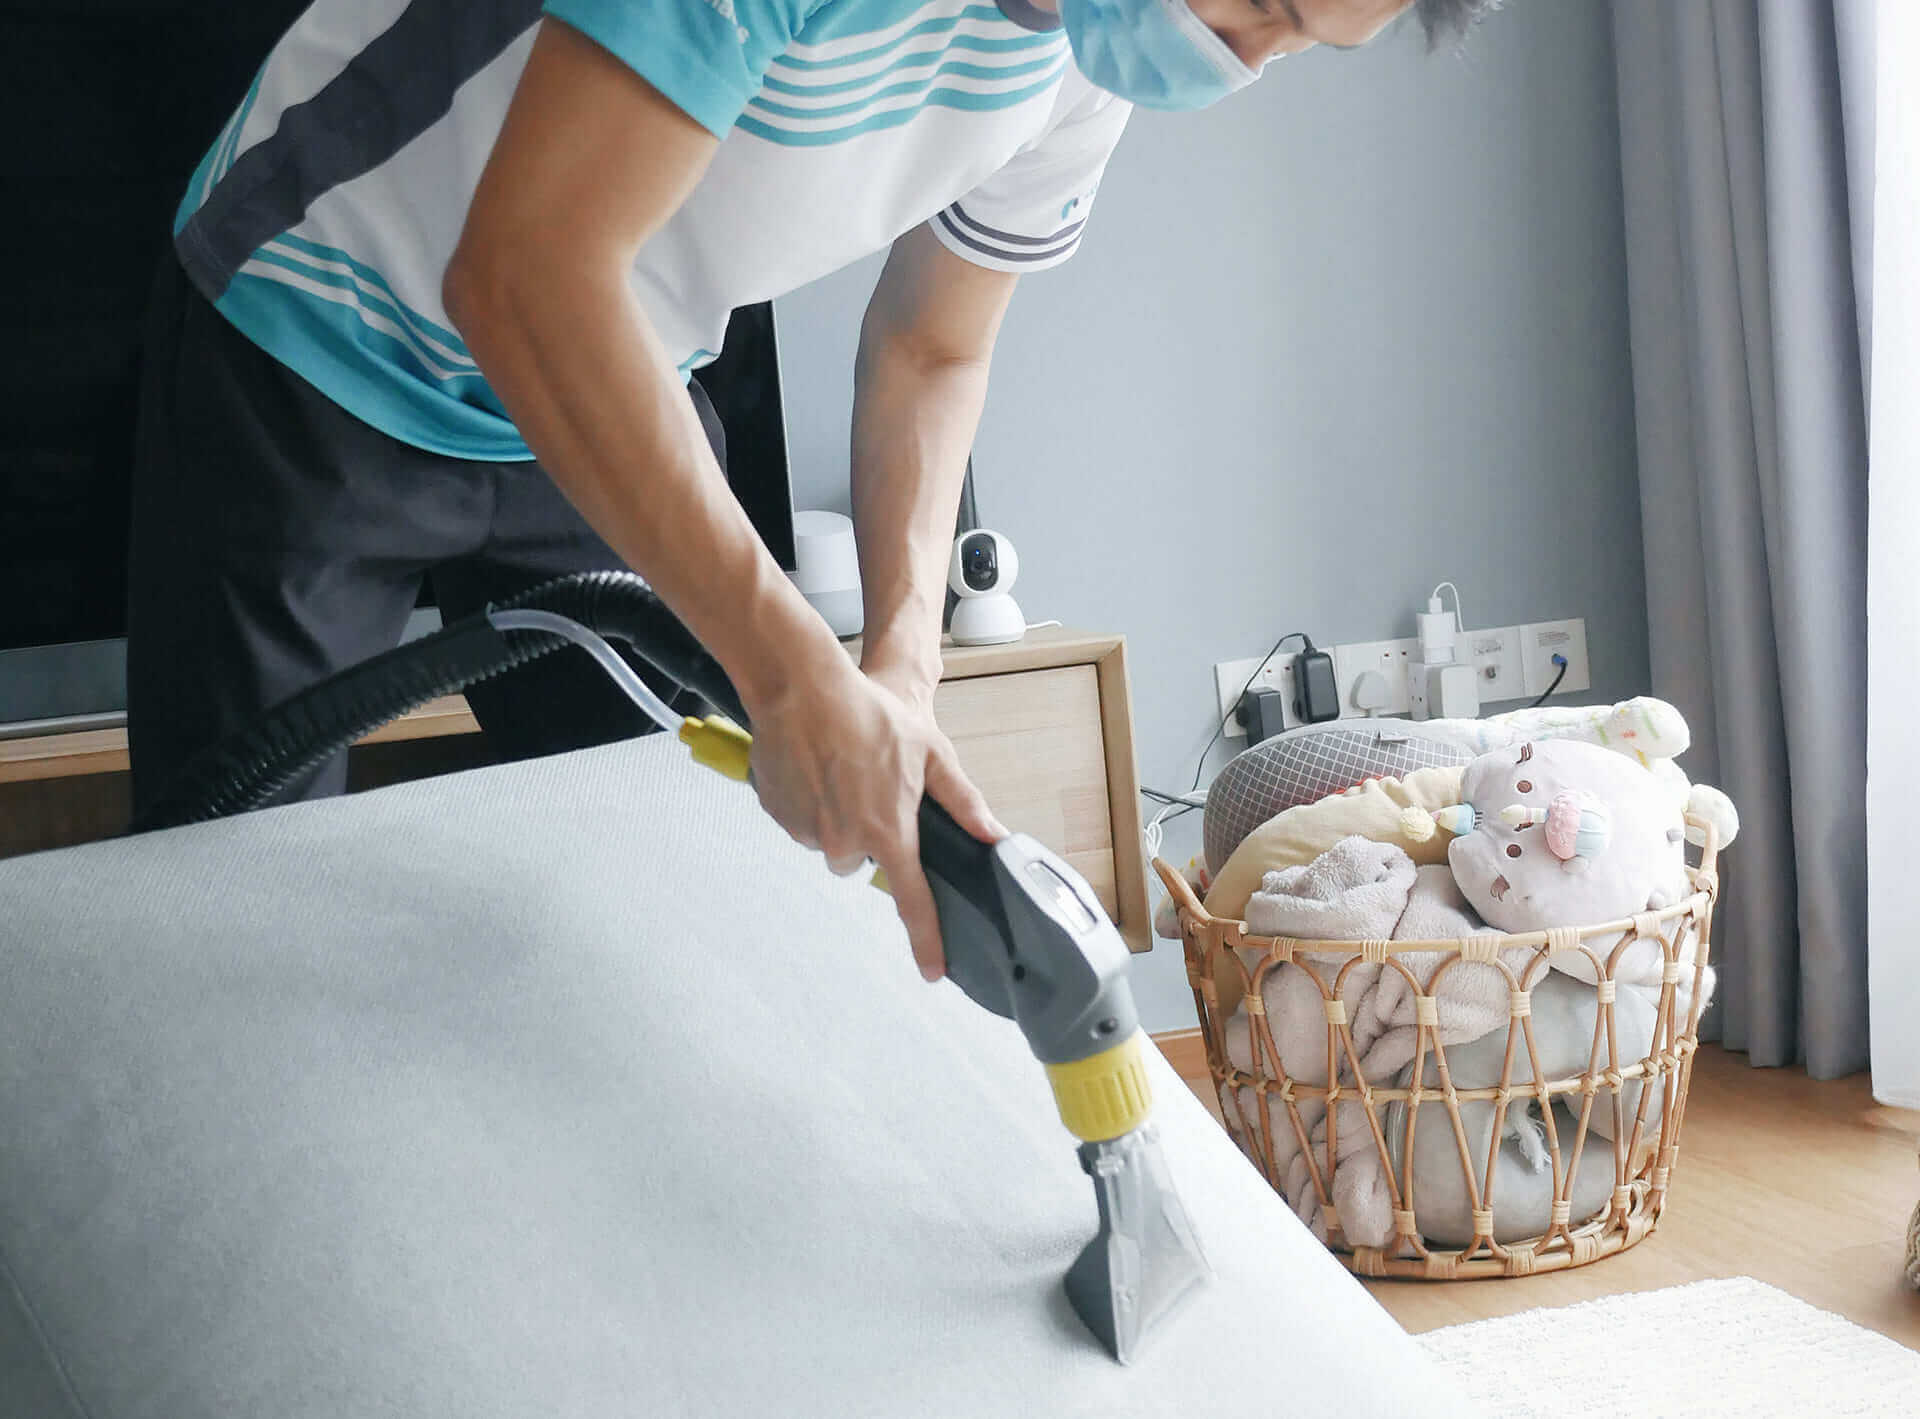 How tHow to Save on Professional Sofa Cleaning Serviceo Save on Professional Sofa Cleaning Services in Singapore with these Hacks